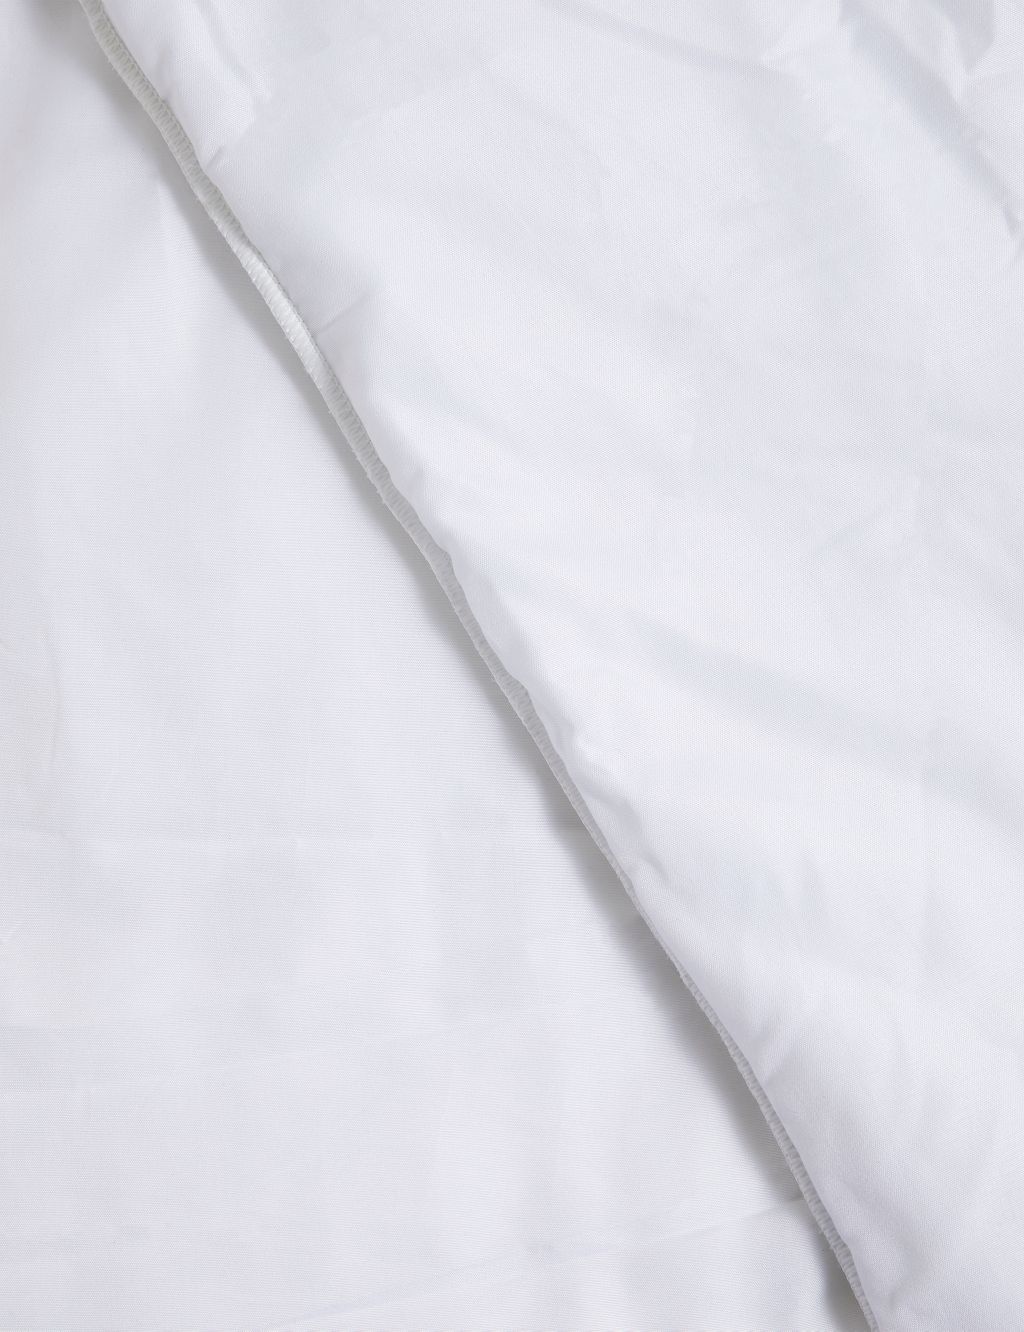 Simply Protect 10.5 Tog Duvet image 3